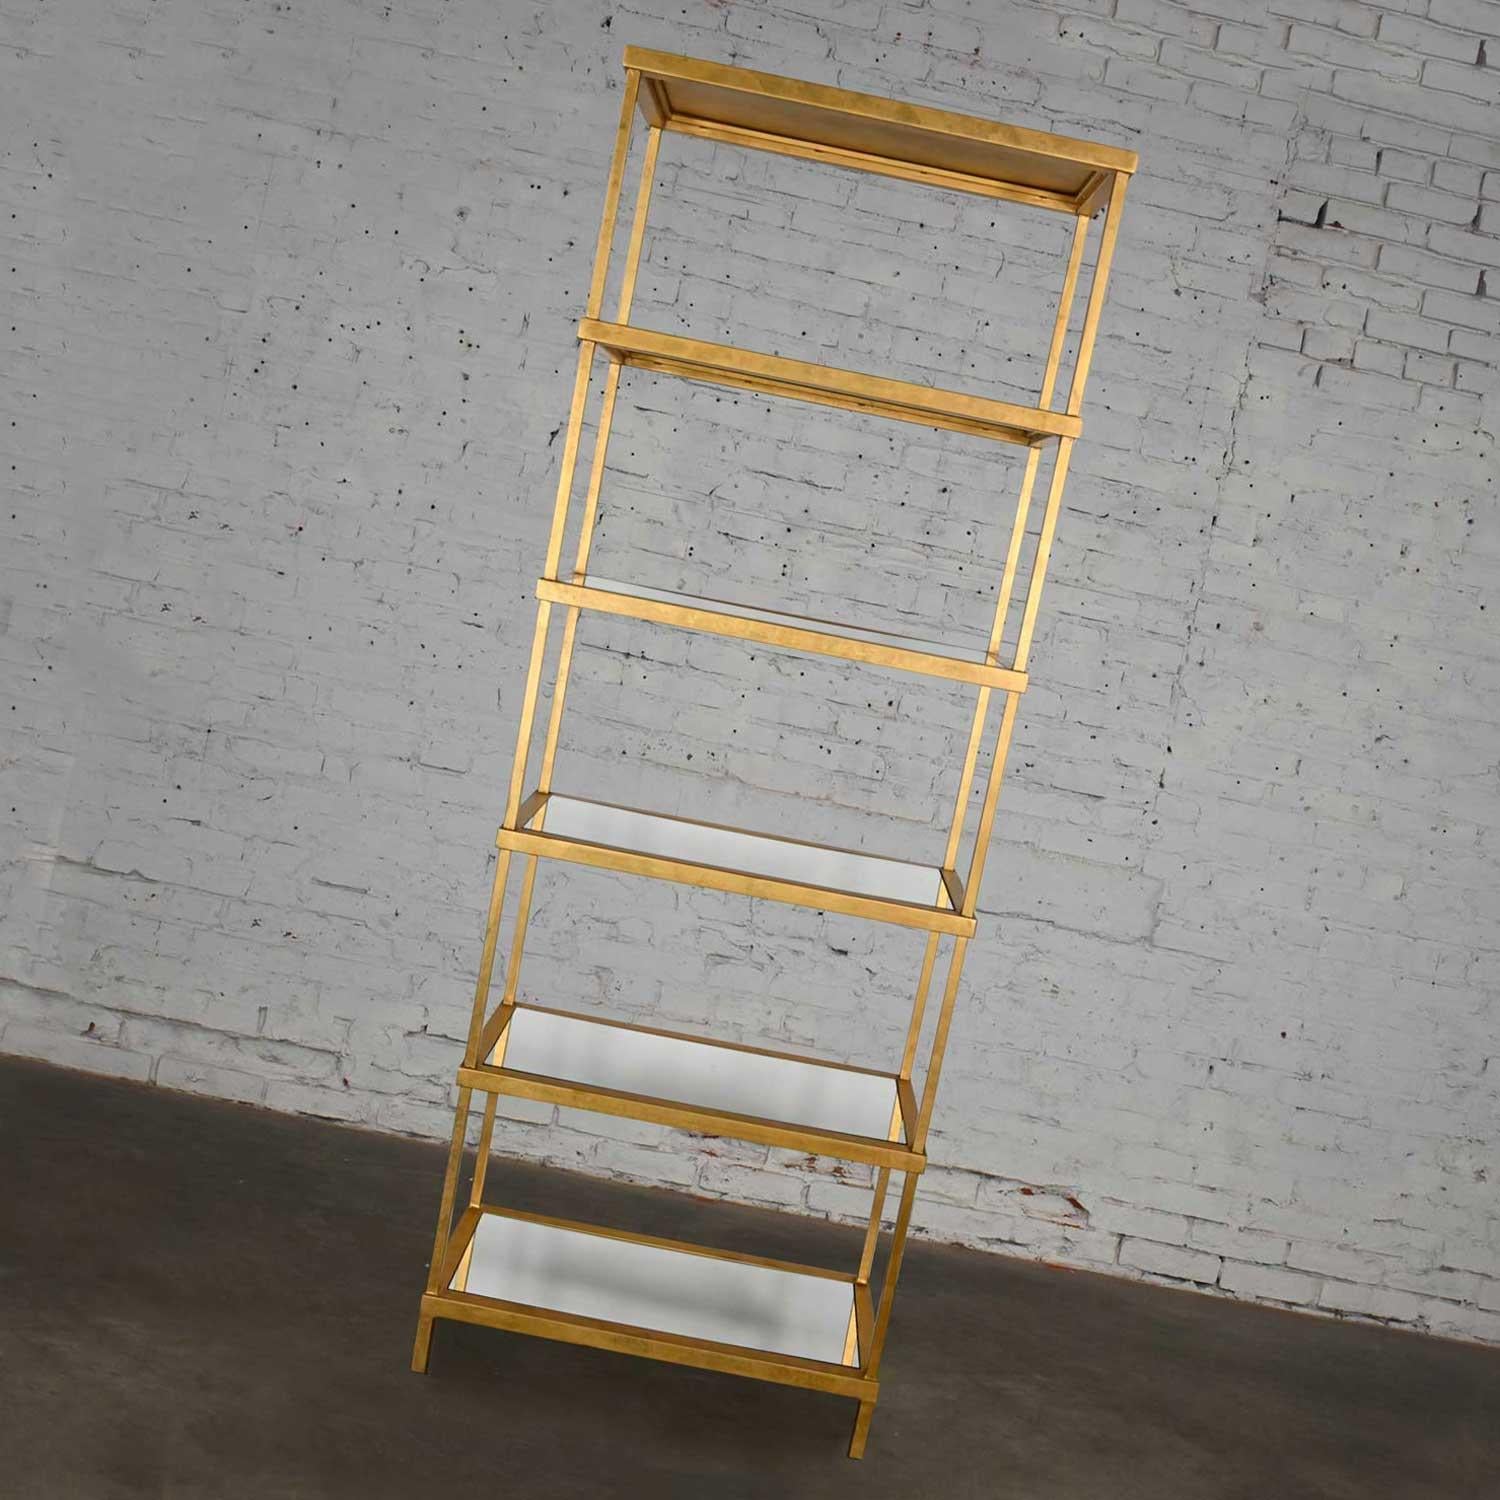 Gorgeous Hollywood Regency or Modern style Chelsea House gold finished iron tall etagere with six mirrored shelves. Beautiful condition, keeping in mind that this is vintage and not new so will have signs of use and wear. Please see photos and zoom